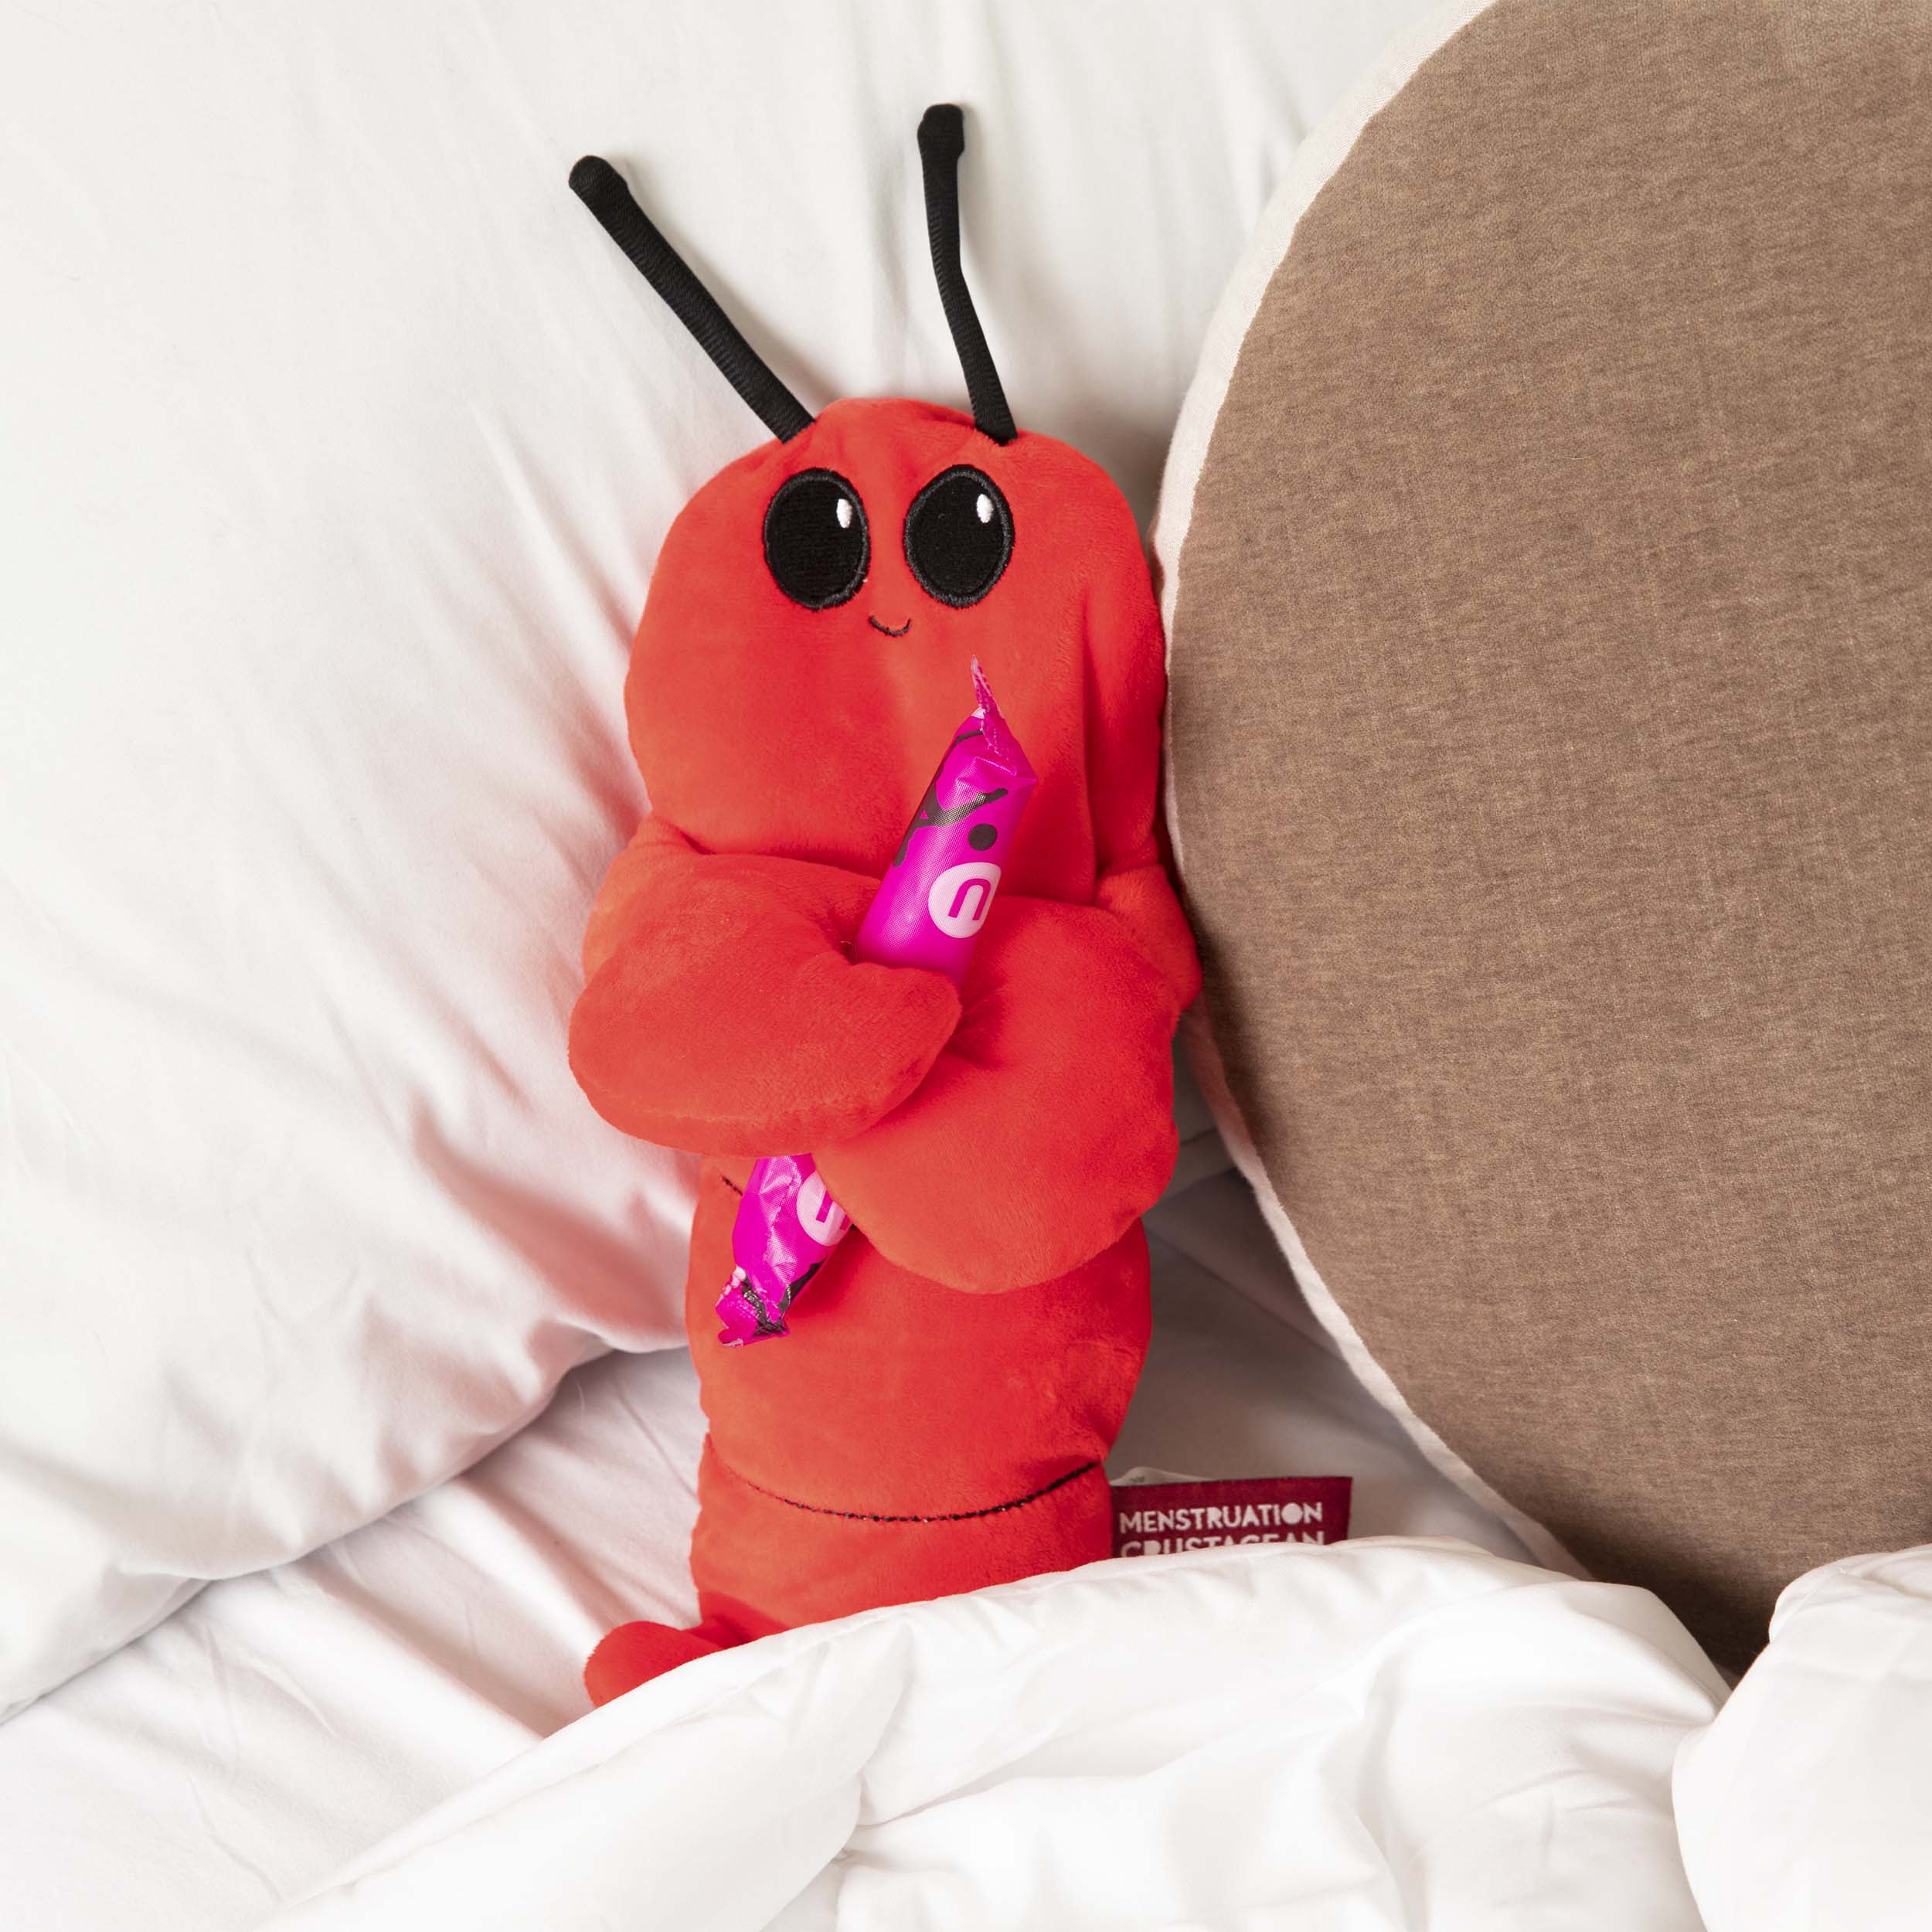 Menstruation Crustacean Lobster Heating Pad For Period Cramps & Muscle Pain